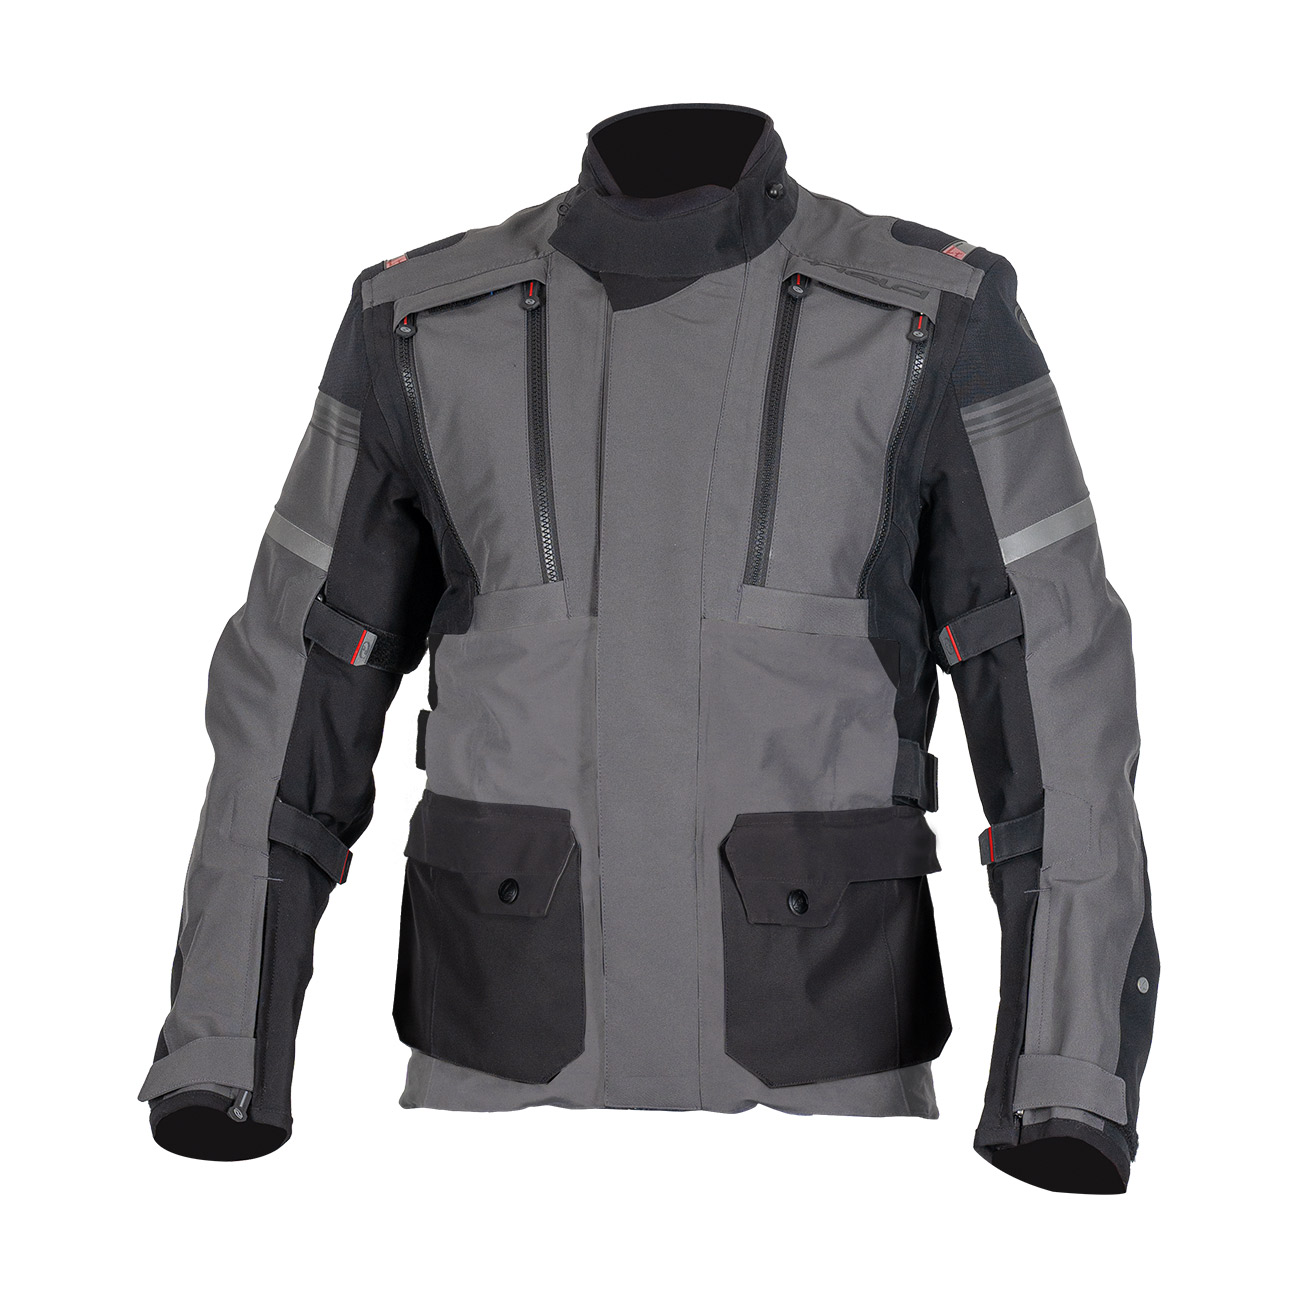 Omberg Top Touring jacket